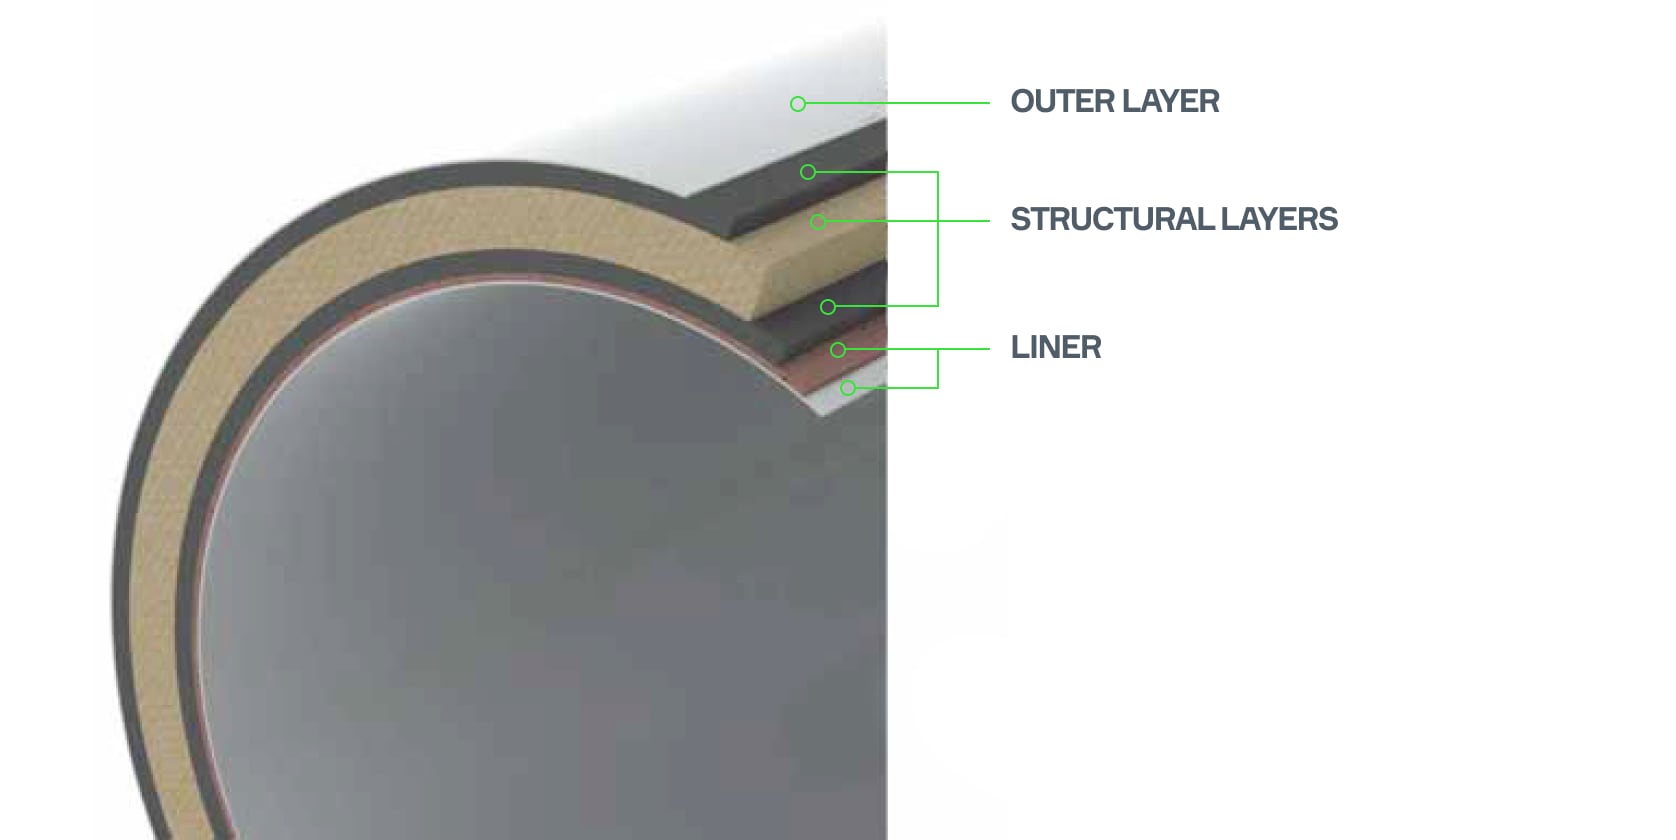 A cross-section of the SUPERLIT pipe showing the outer layer, structural layers, and liner